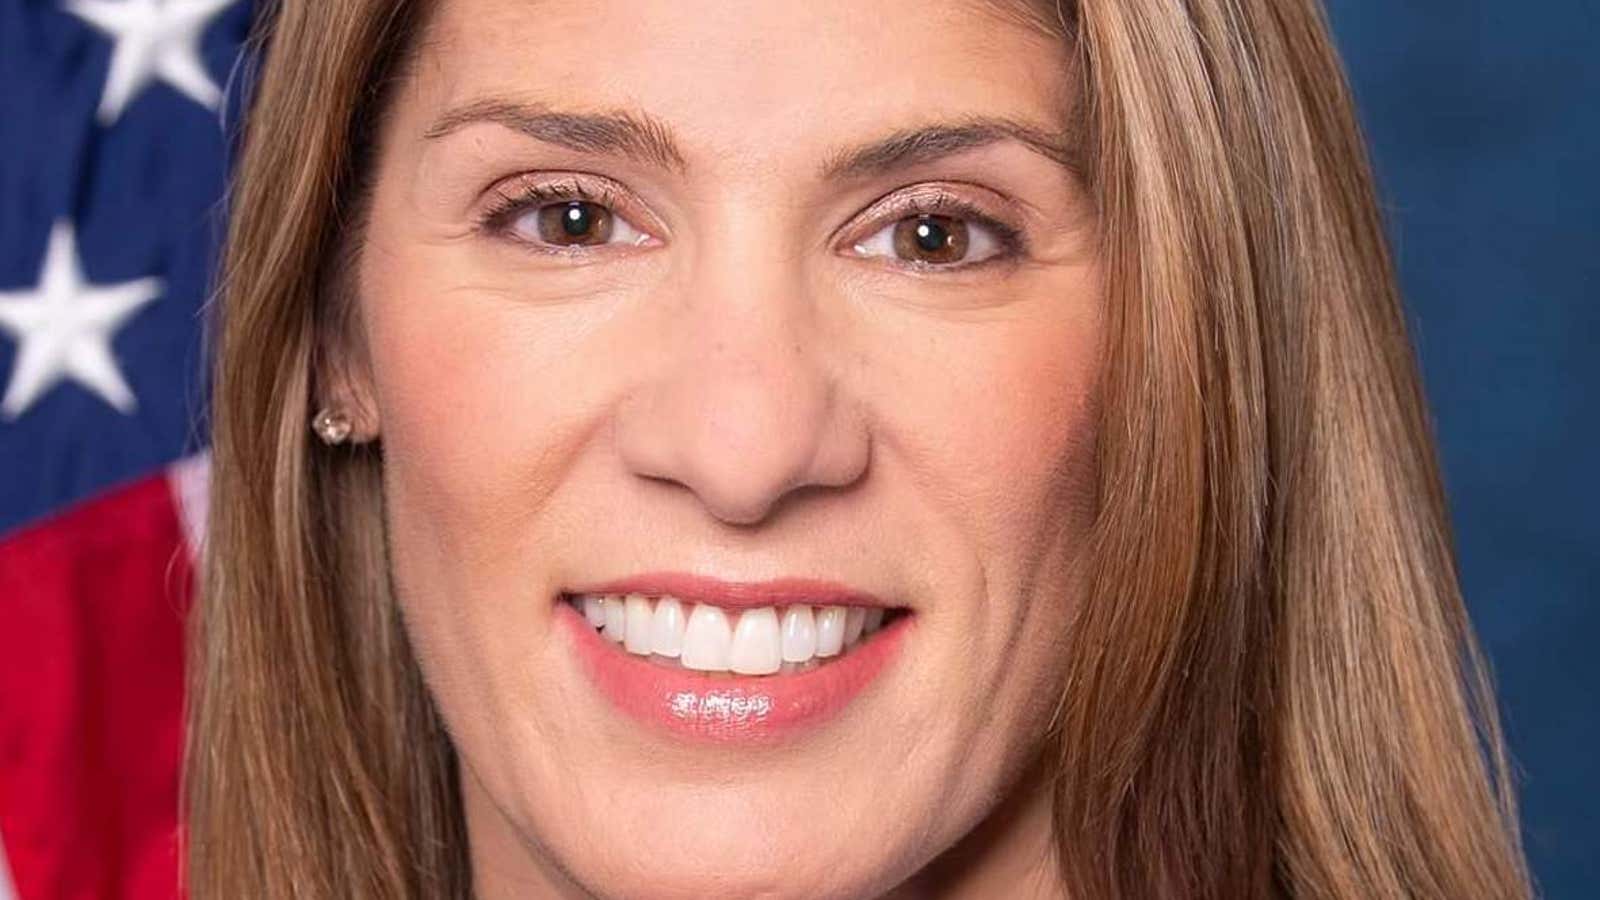 Rep. Lori Trahan knows there will always be reasons not to run for office, but focusing on personal contributions can change that